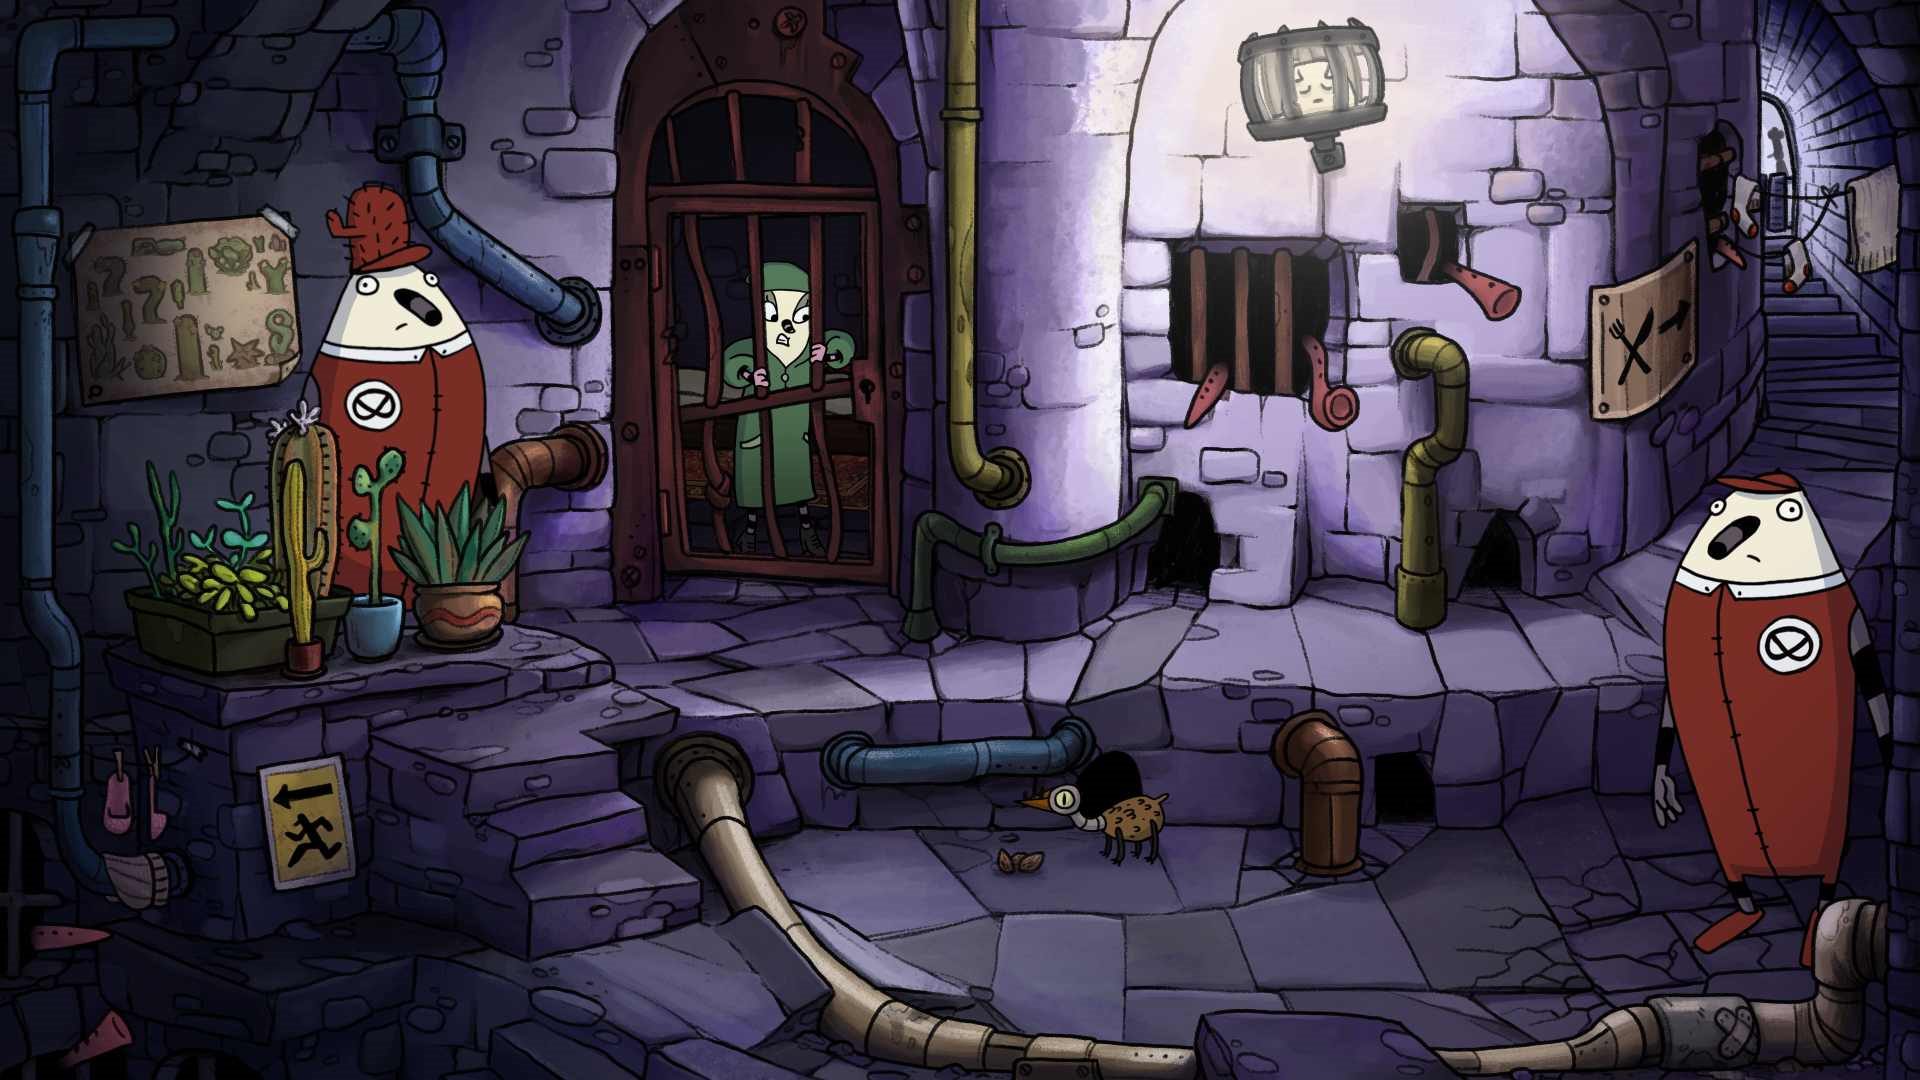 Some Brand-New In-game Screenshots of the Highly Anticipated Adventure Game